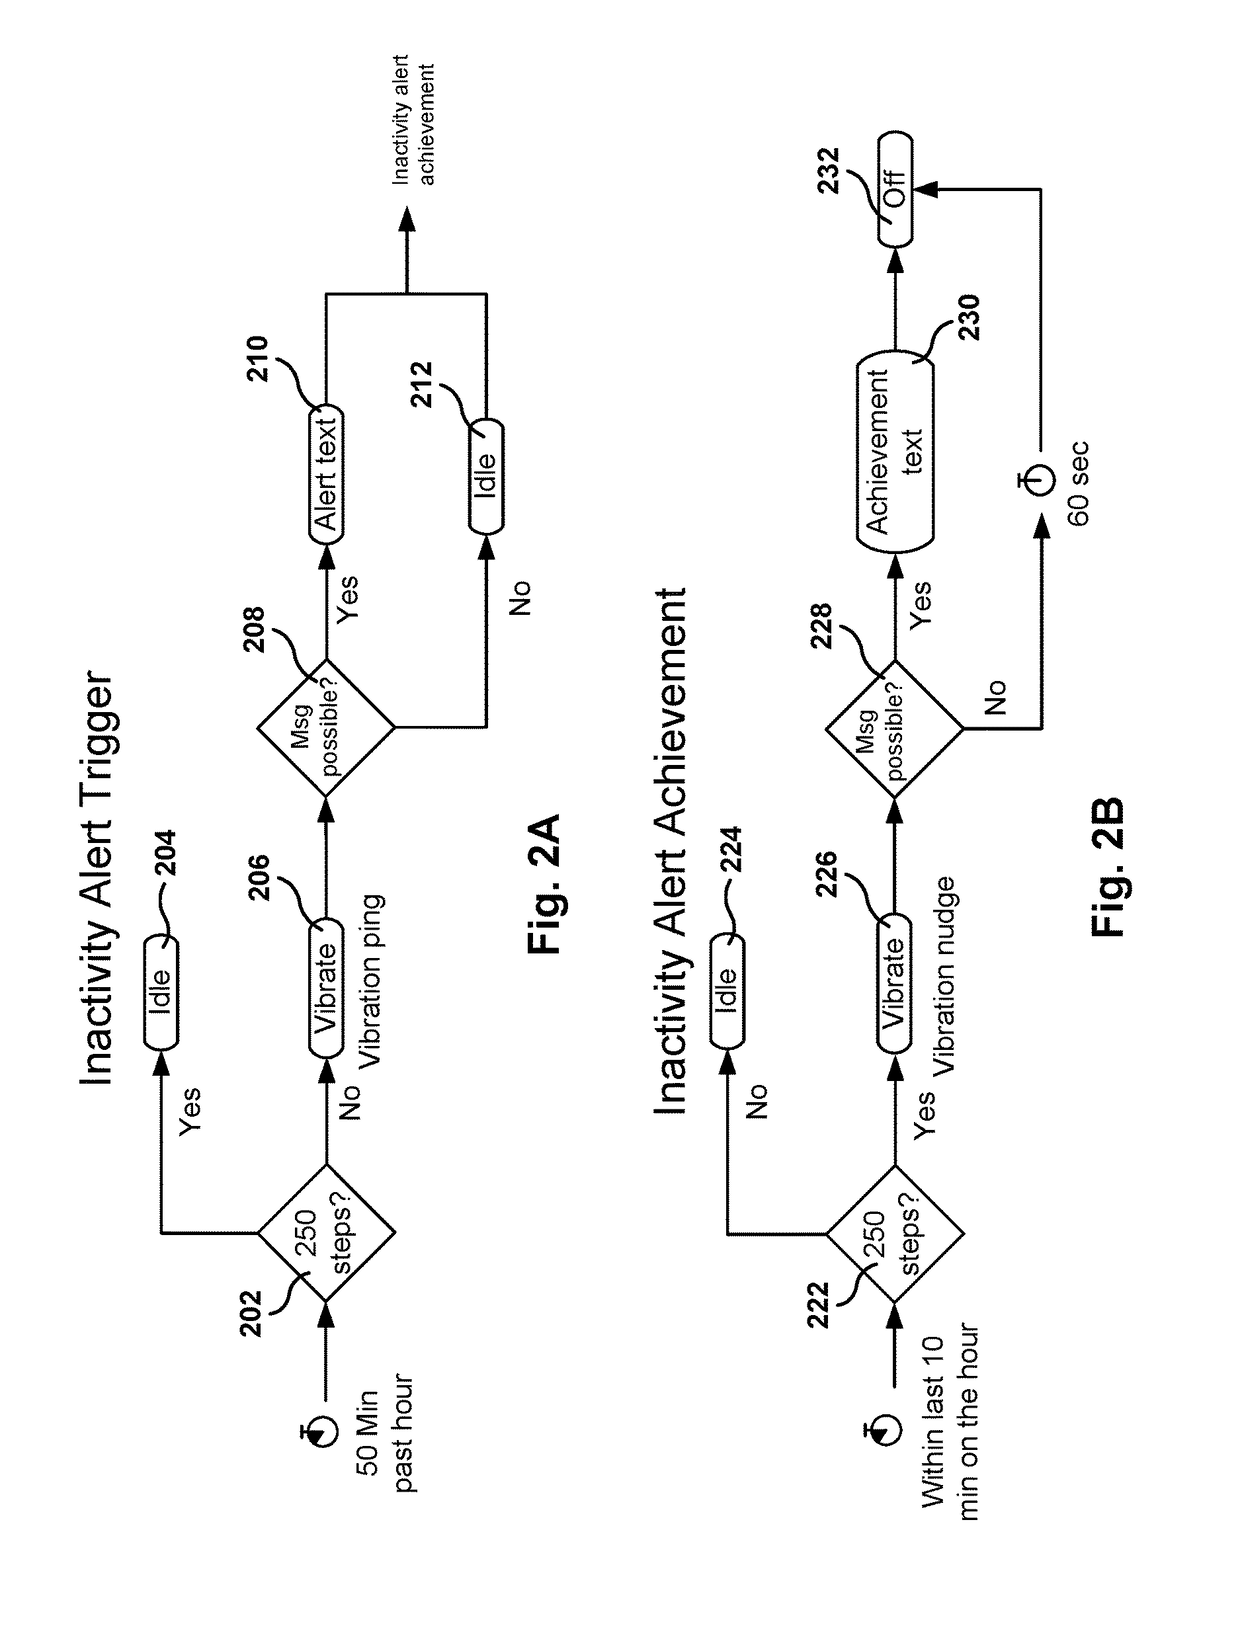 Generation of sedentary time information by activity tracking device